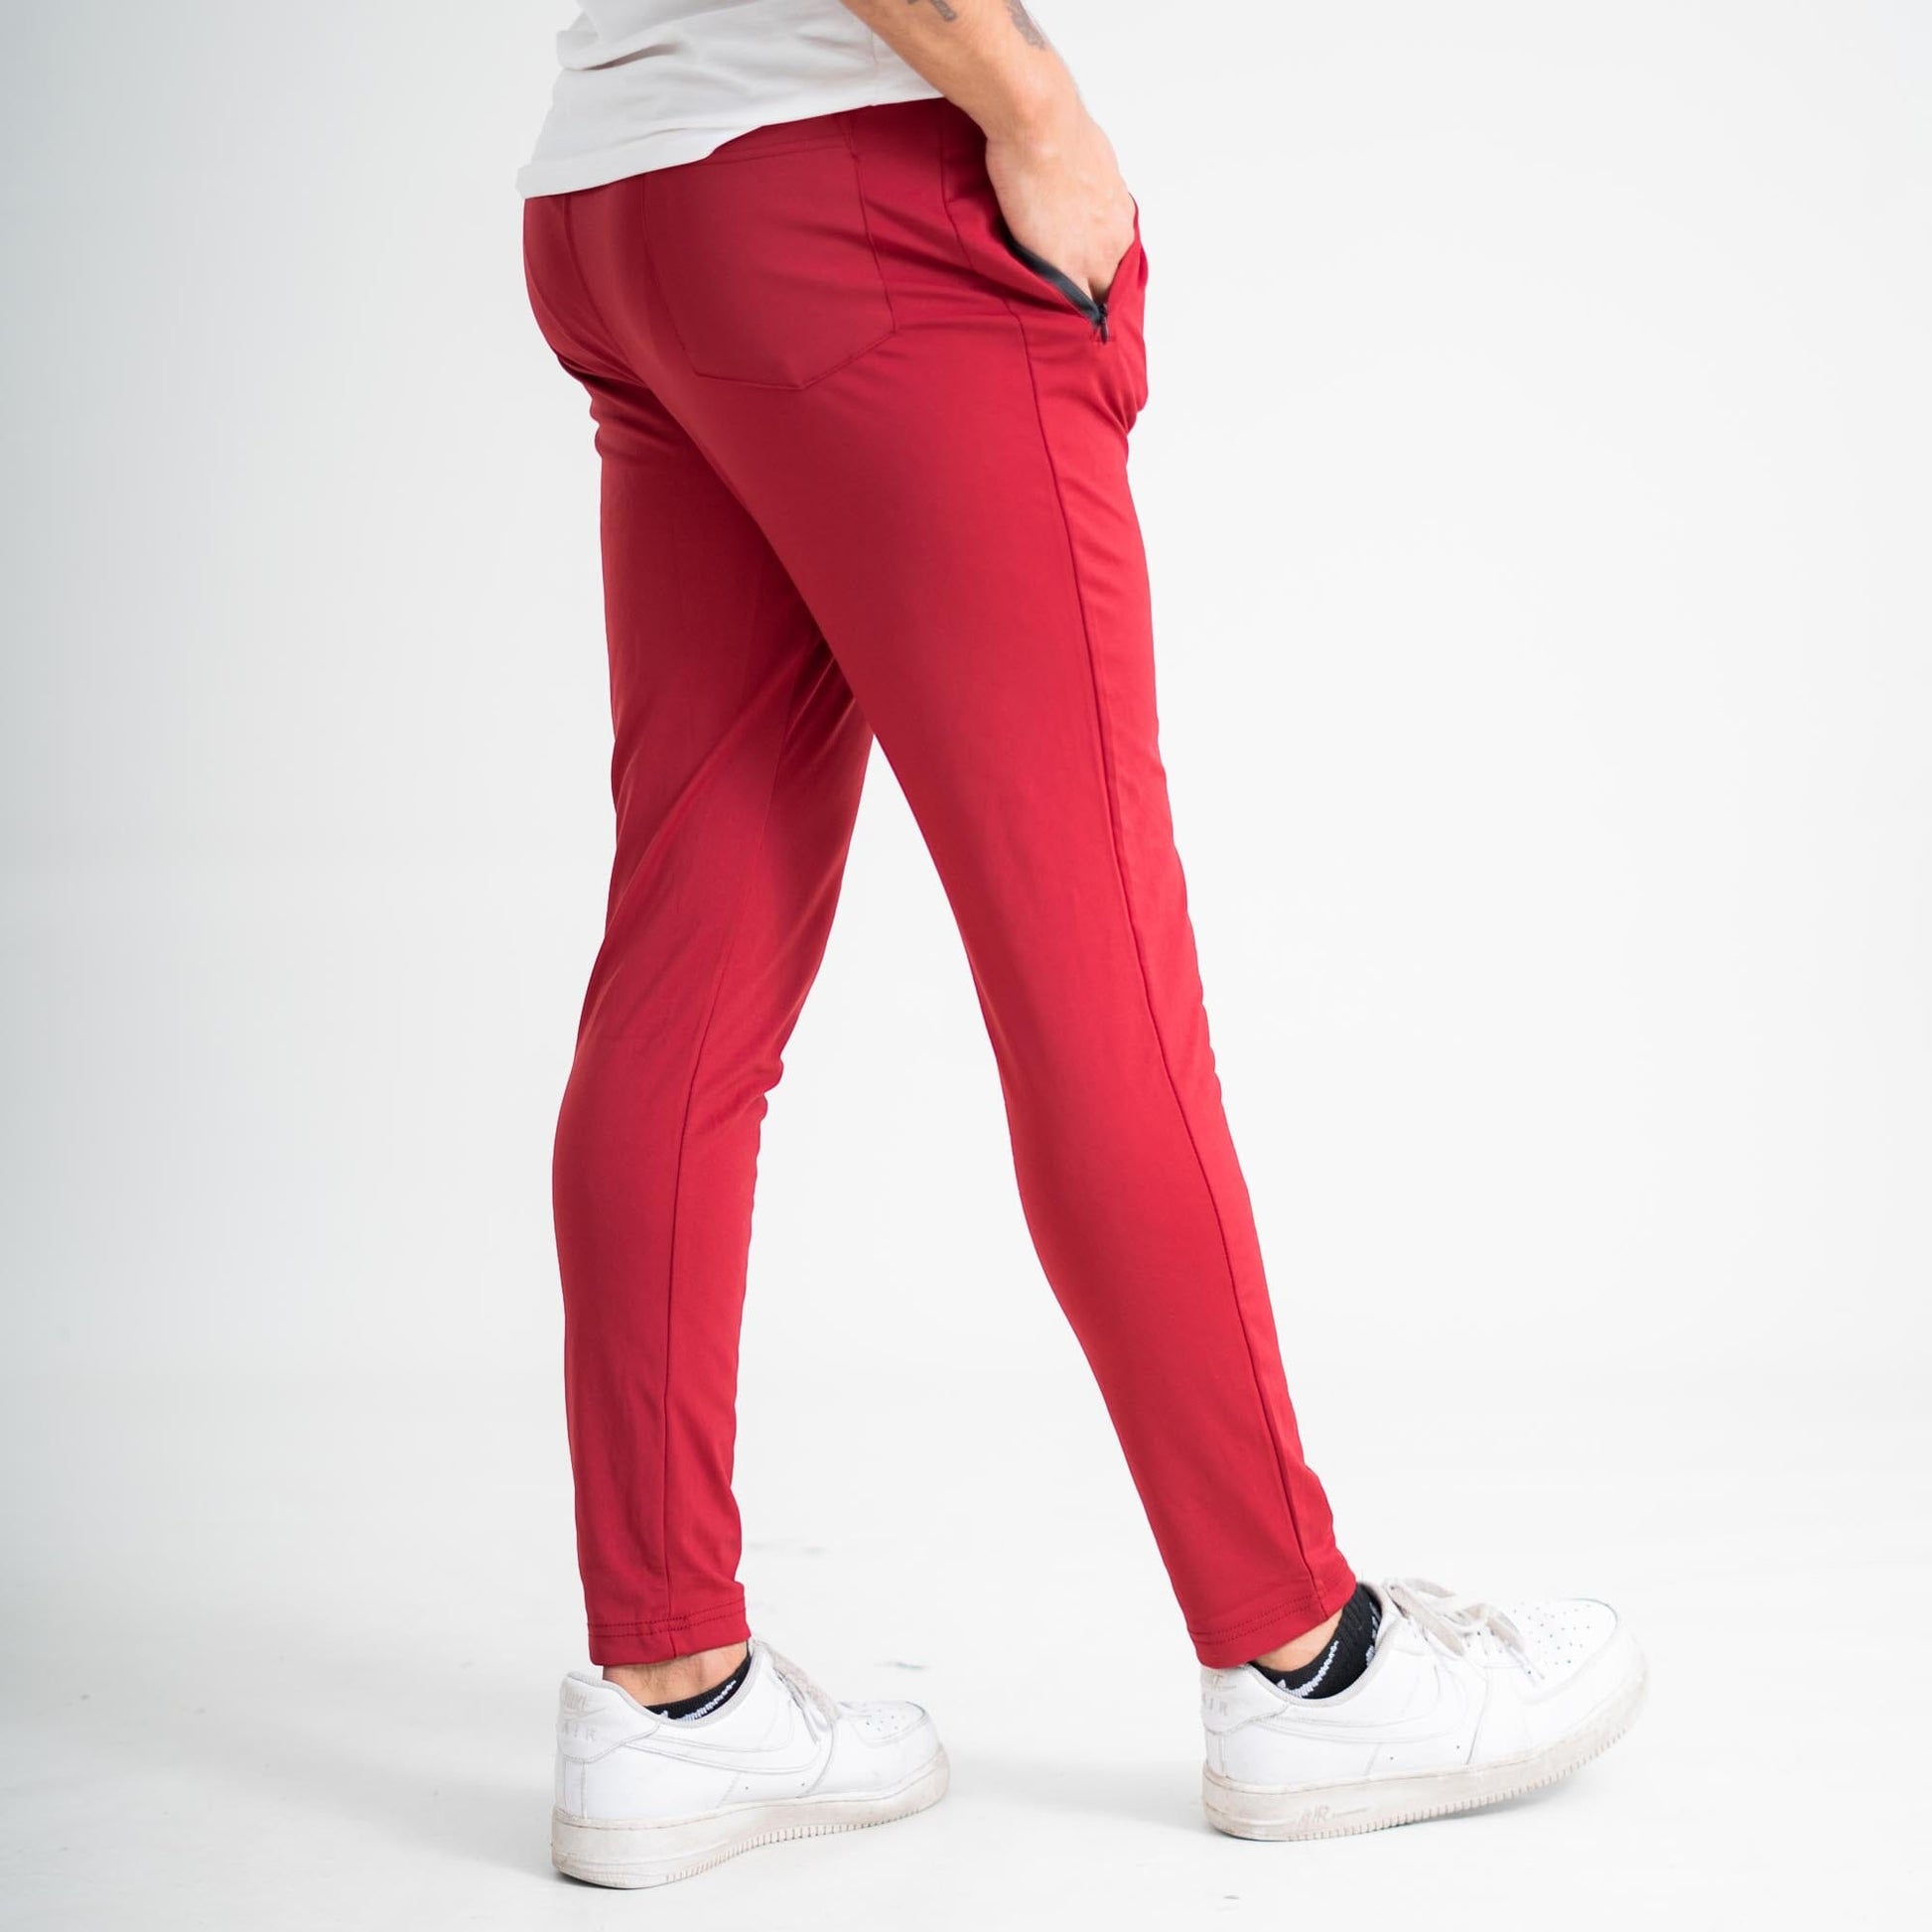 luluemon Joggers You Can Live And Workout In This Fall - Fashion Jackson